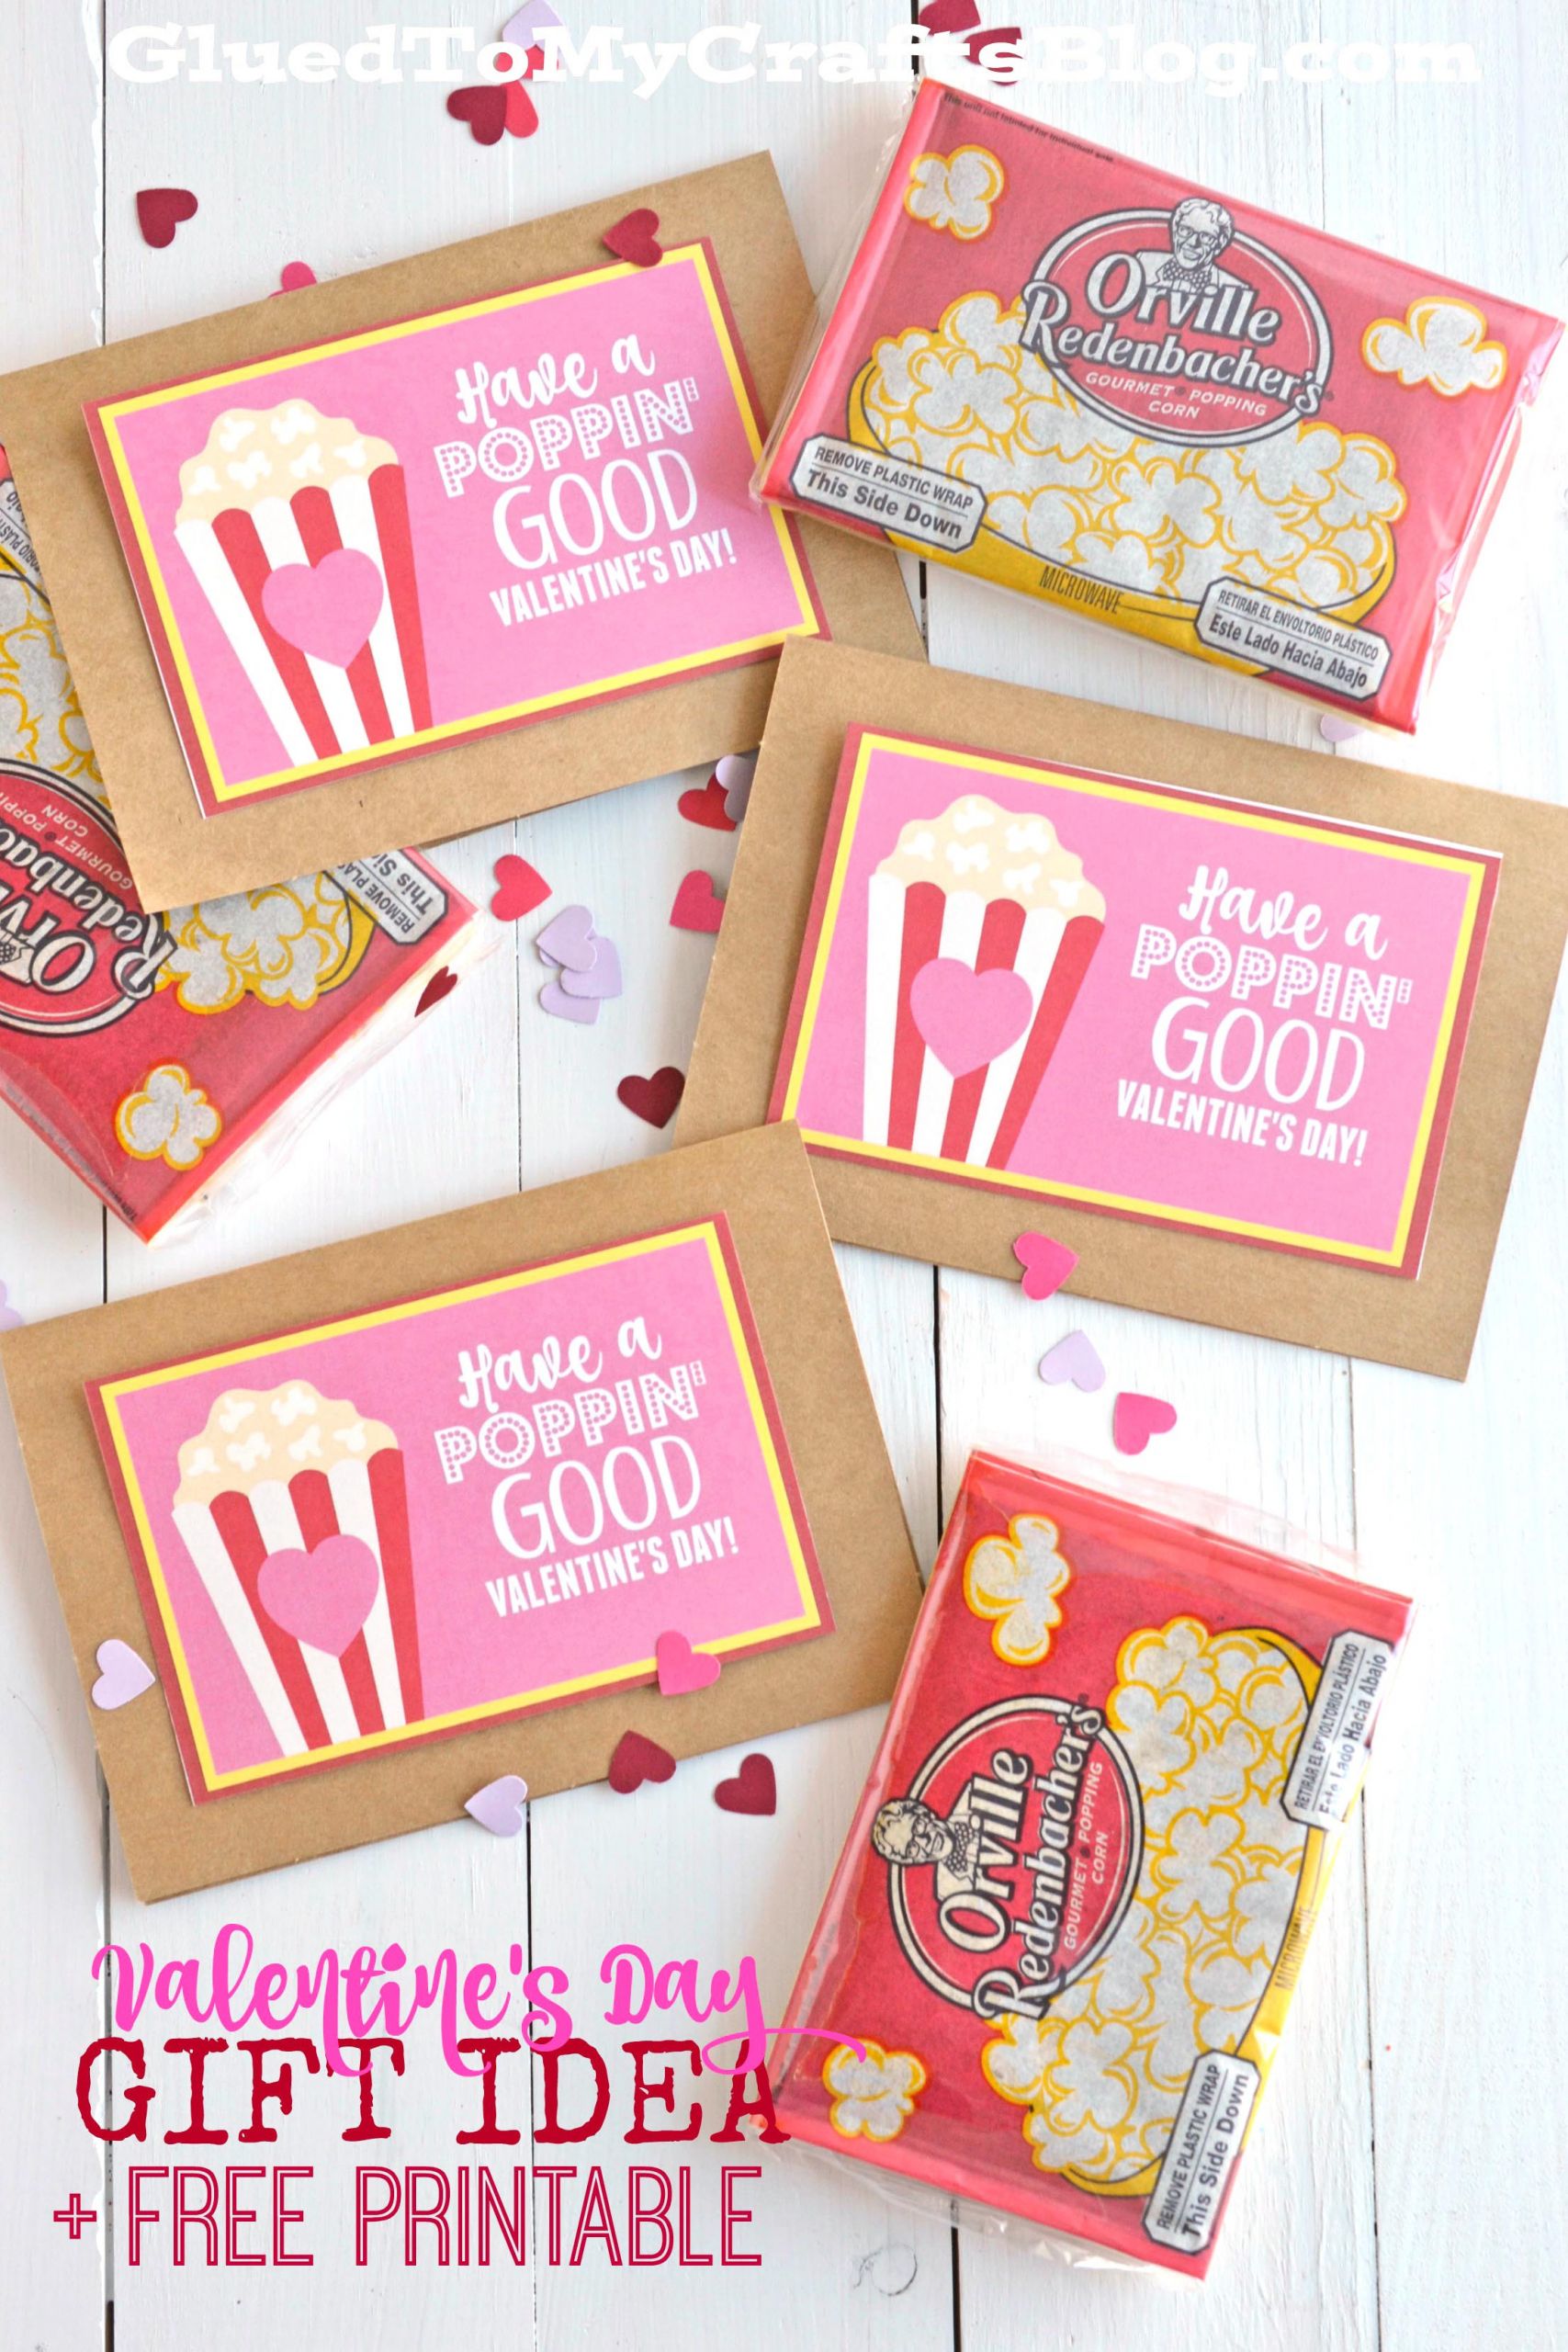 Great Valentine'S Day Gift Ideas
 Poppin Good Valentine s Day Gift Idea w free printable